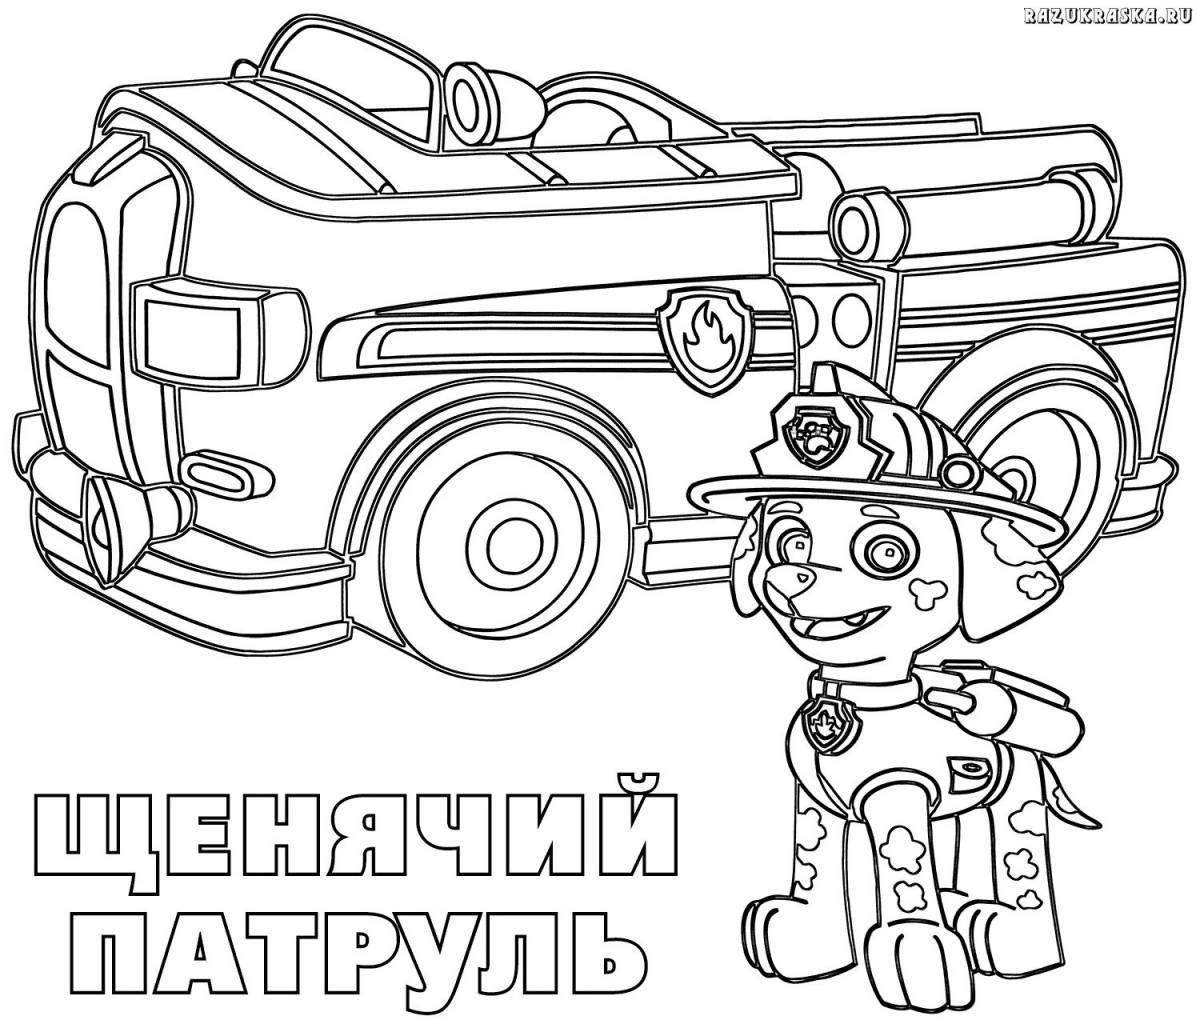 Finley fire truck coloring page